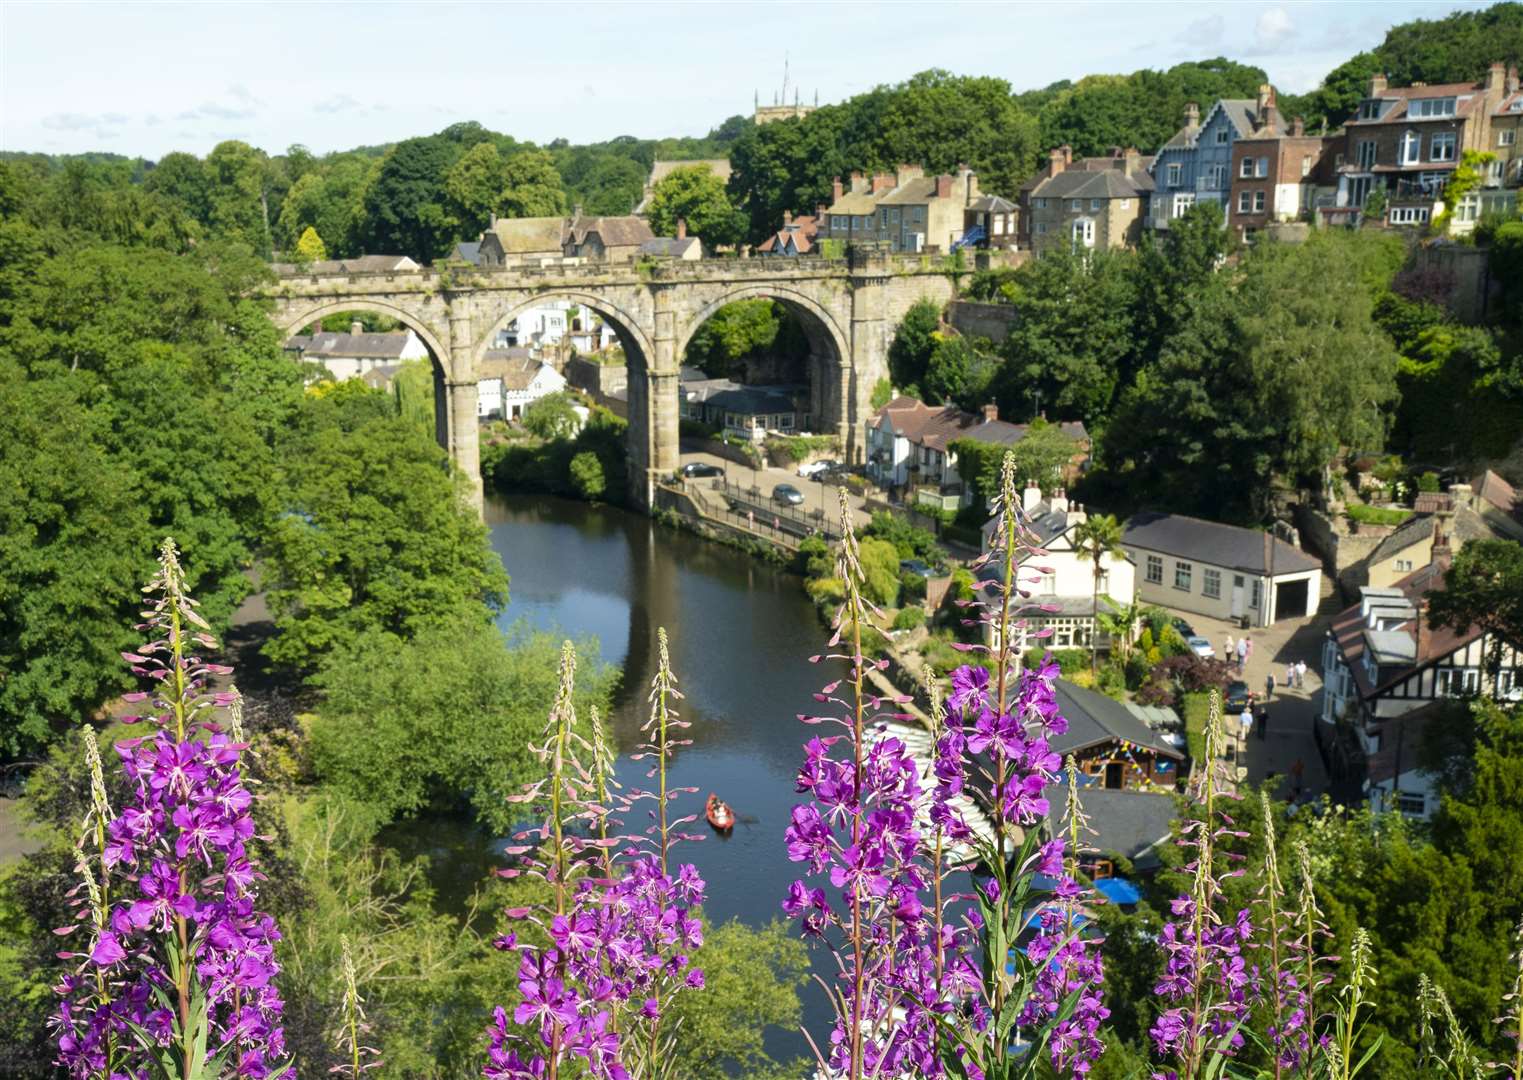 People enjoy the hot weather in a rowing boat underneath the Knaresborough Viaduct on the River Nidd (Danny Lawson/PA)